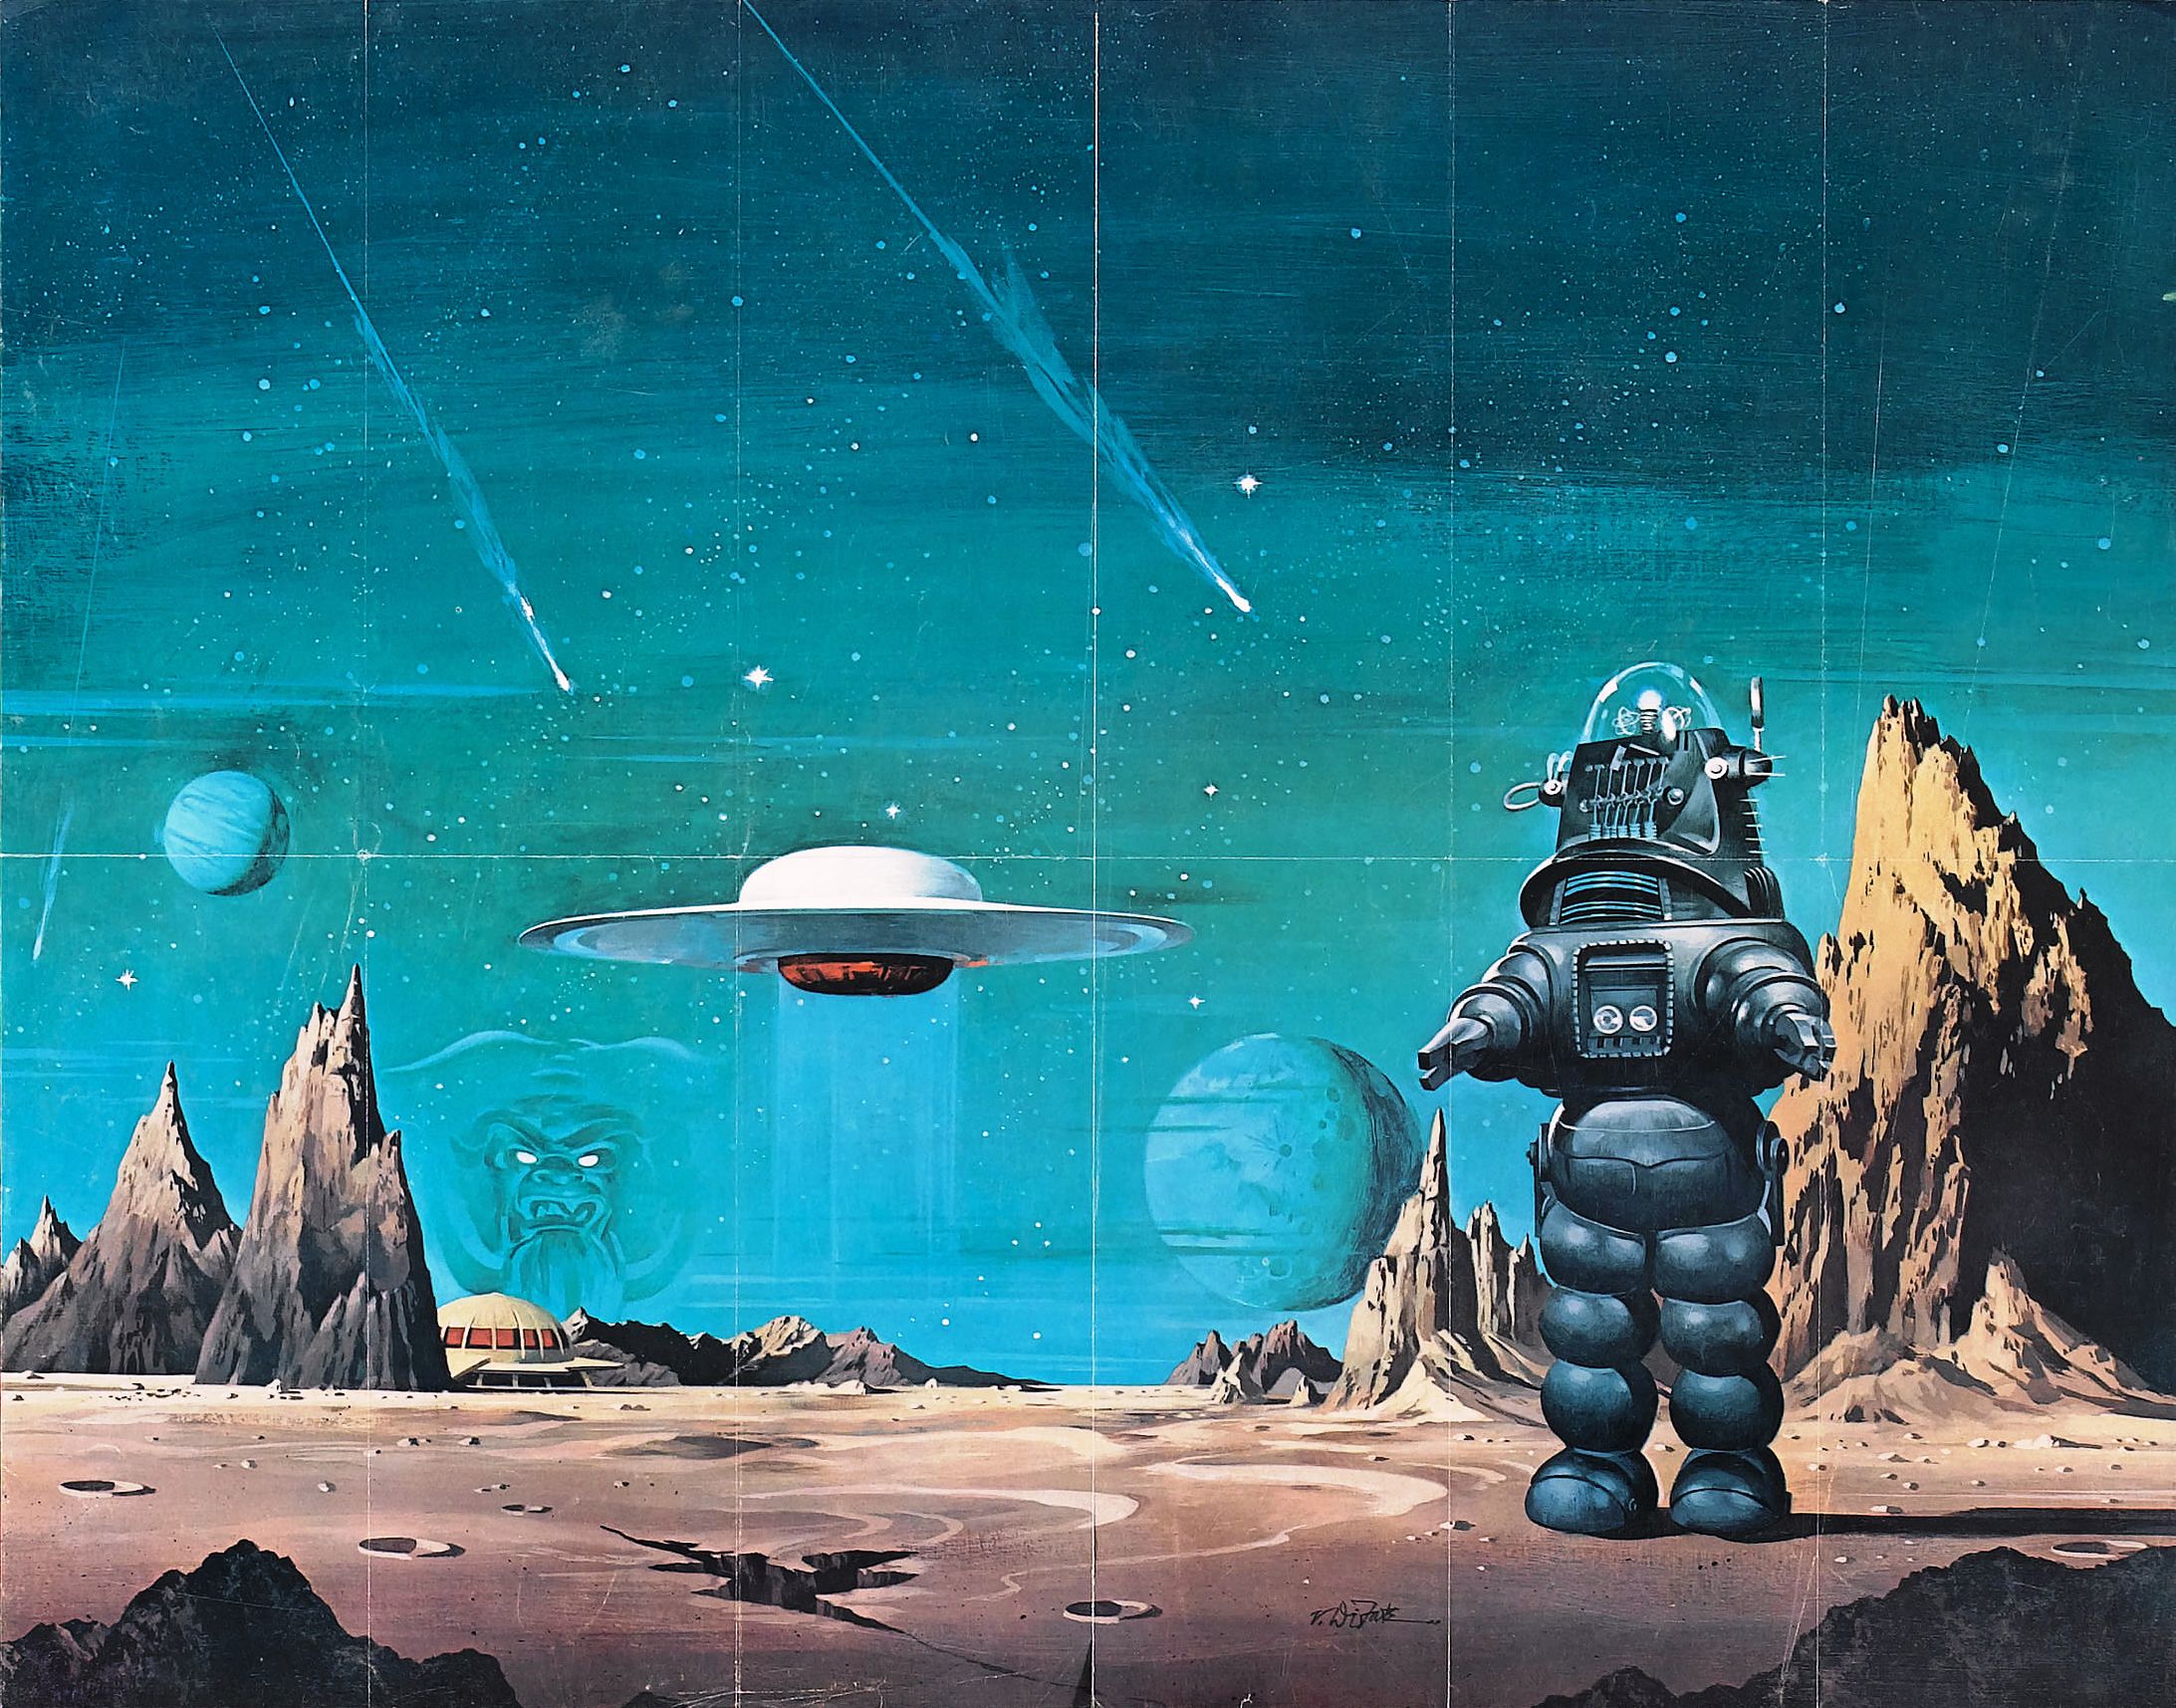 forbidden planet, movie, planet, robby the robot